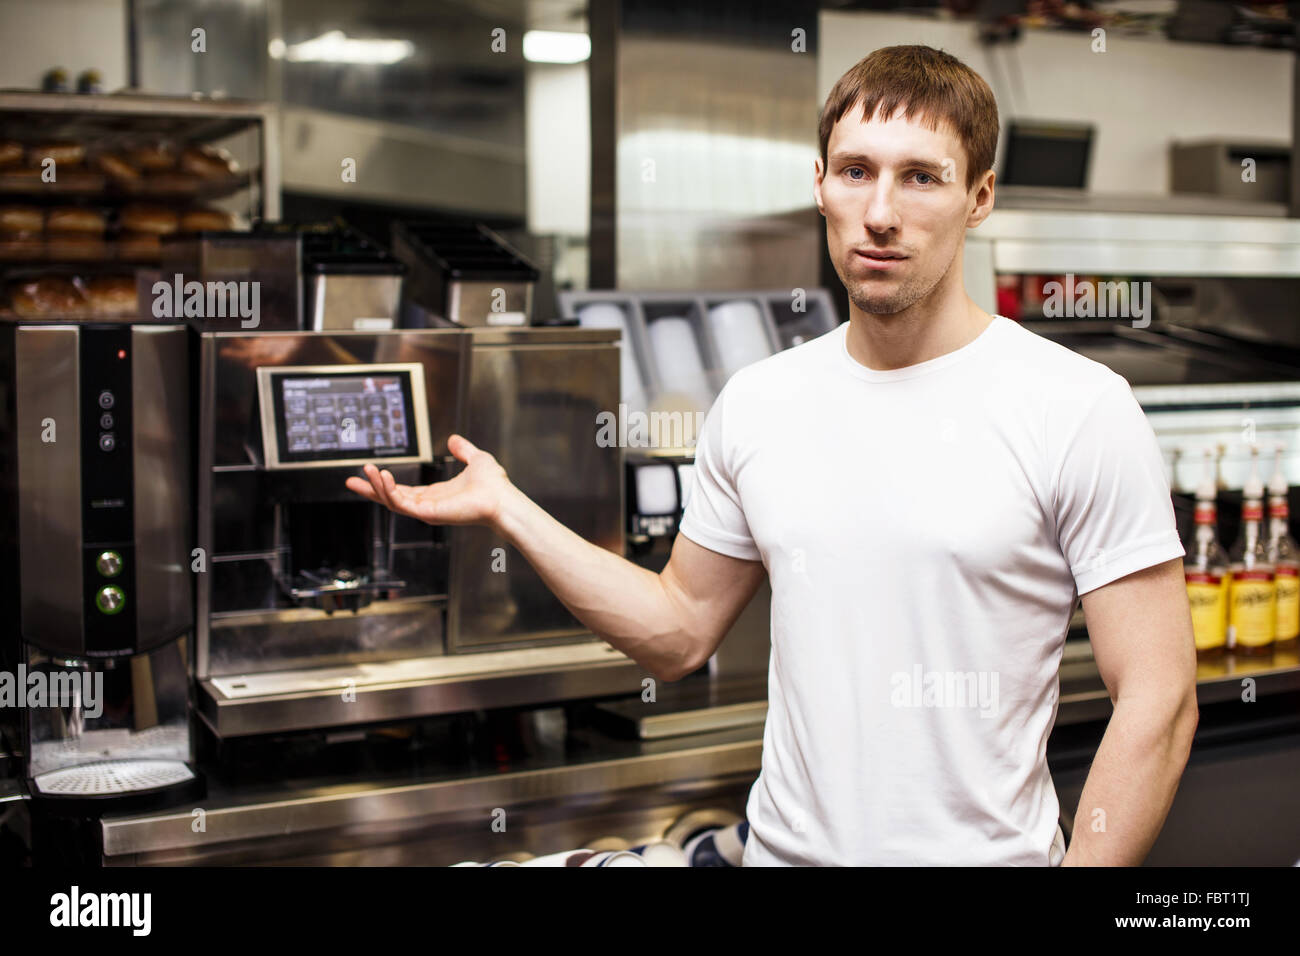 Young barista show professional coffee maker Stock Photo